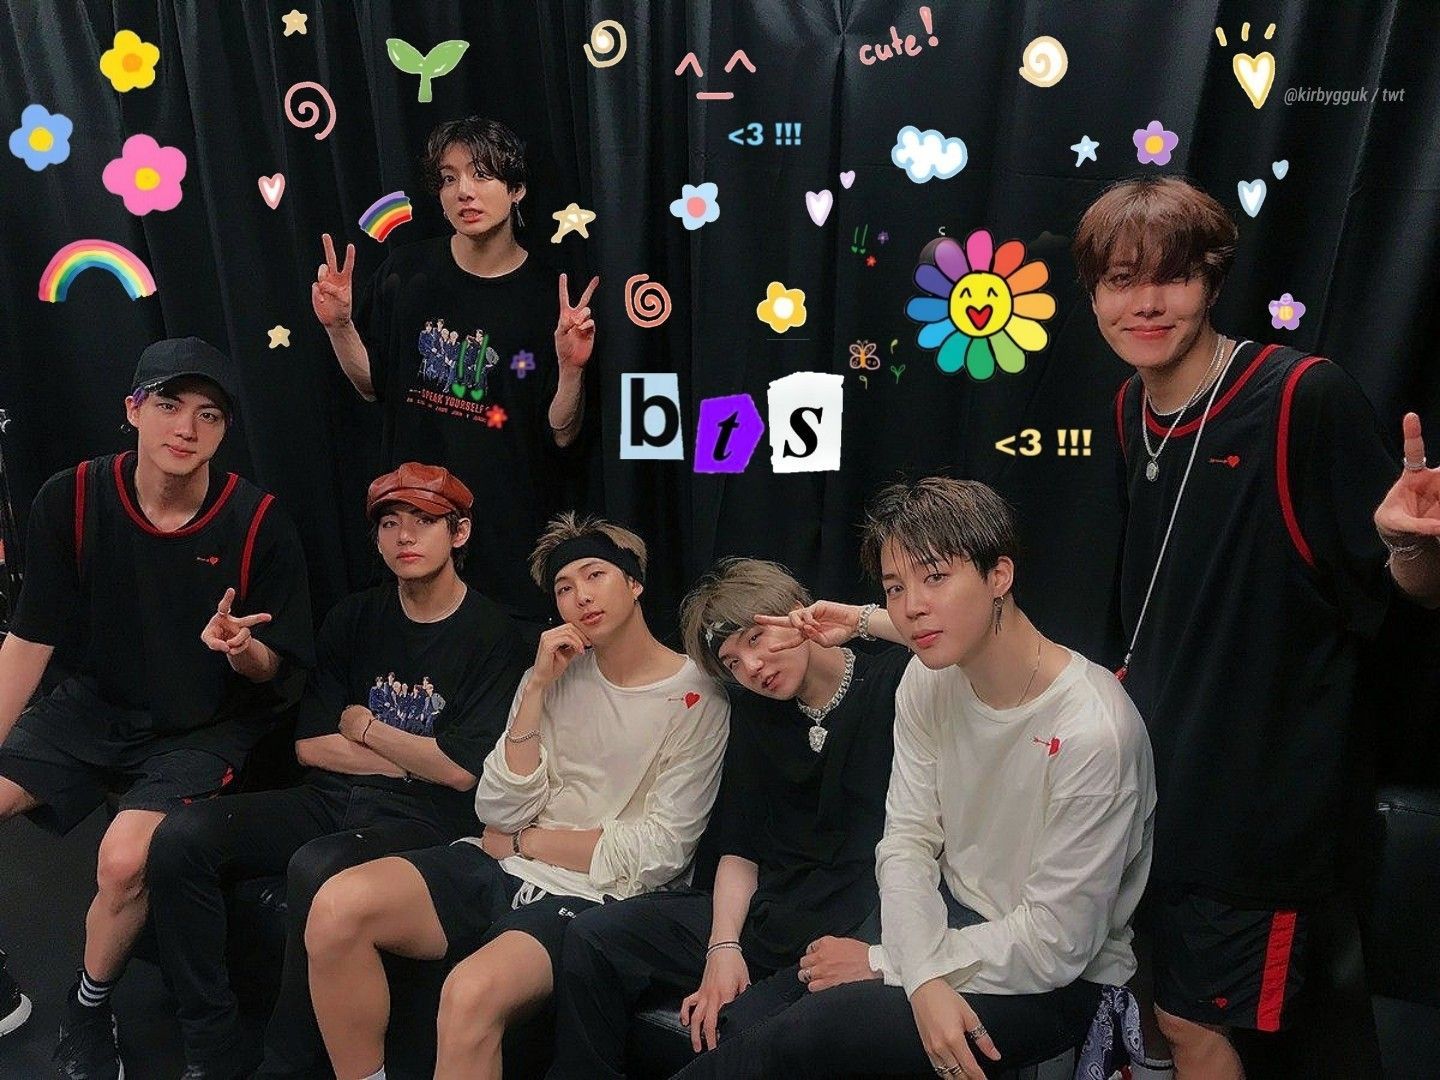 Cute Bts Wallpaper For Laptop, Bts Wallpaper Bts All Members For iPads Tablets Laptops Wattpad of awesome bts desktop wallpaper to download for free